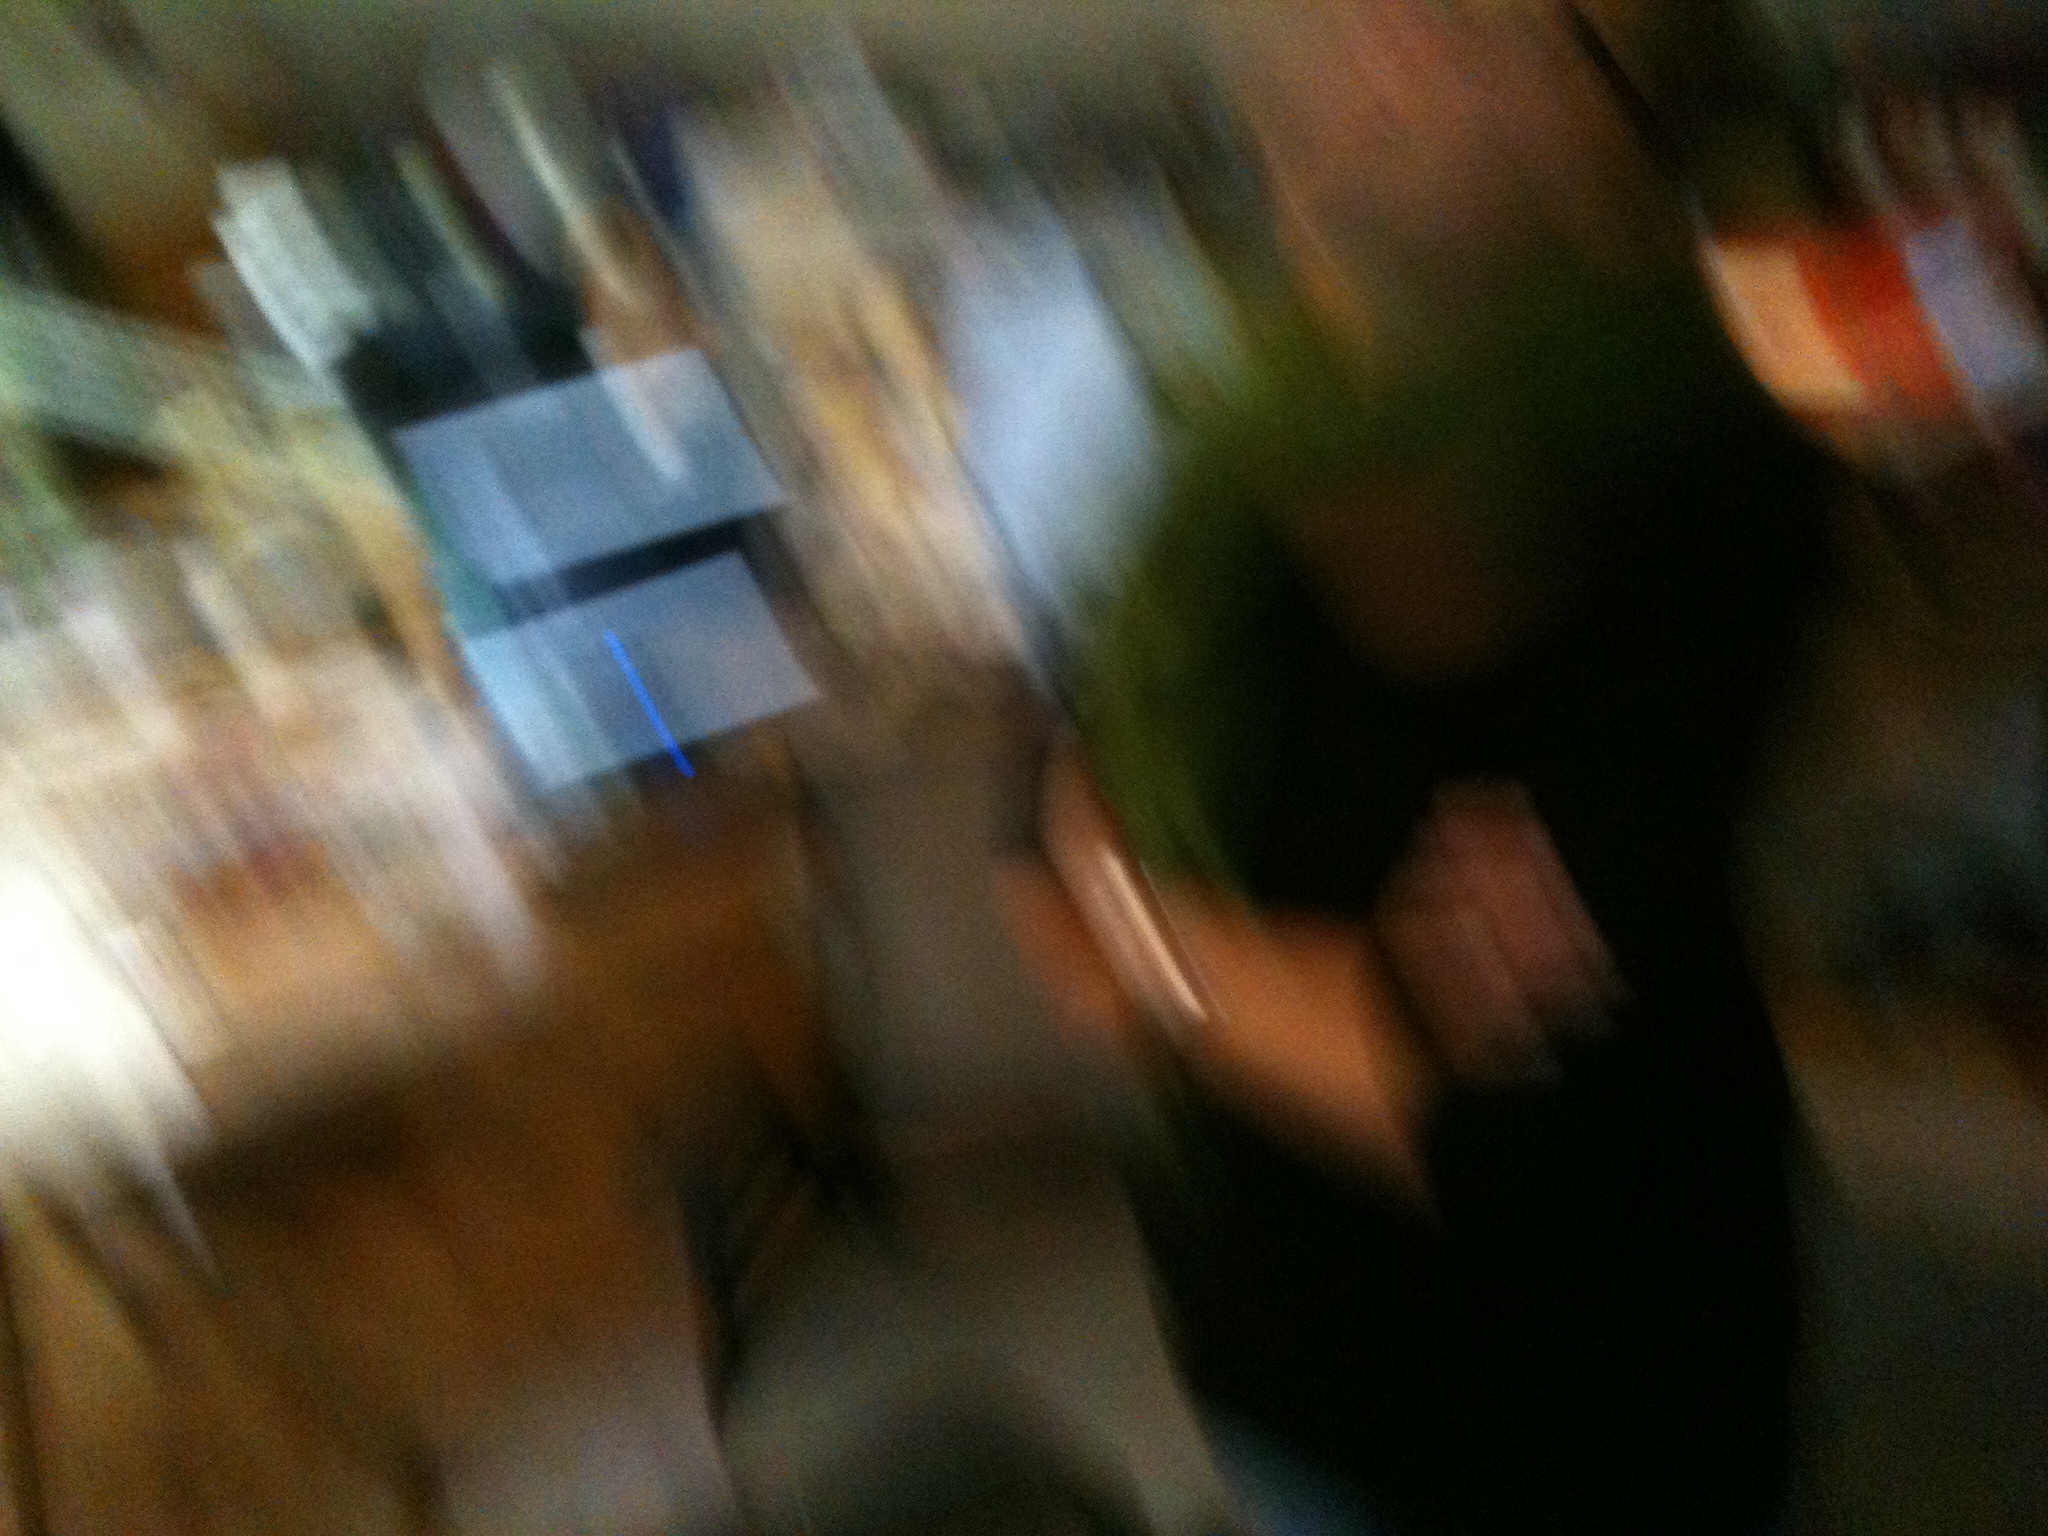 0.about:timeline:2012:iphone:img-0360.jpg